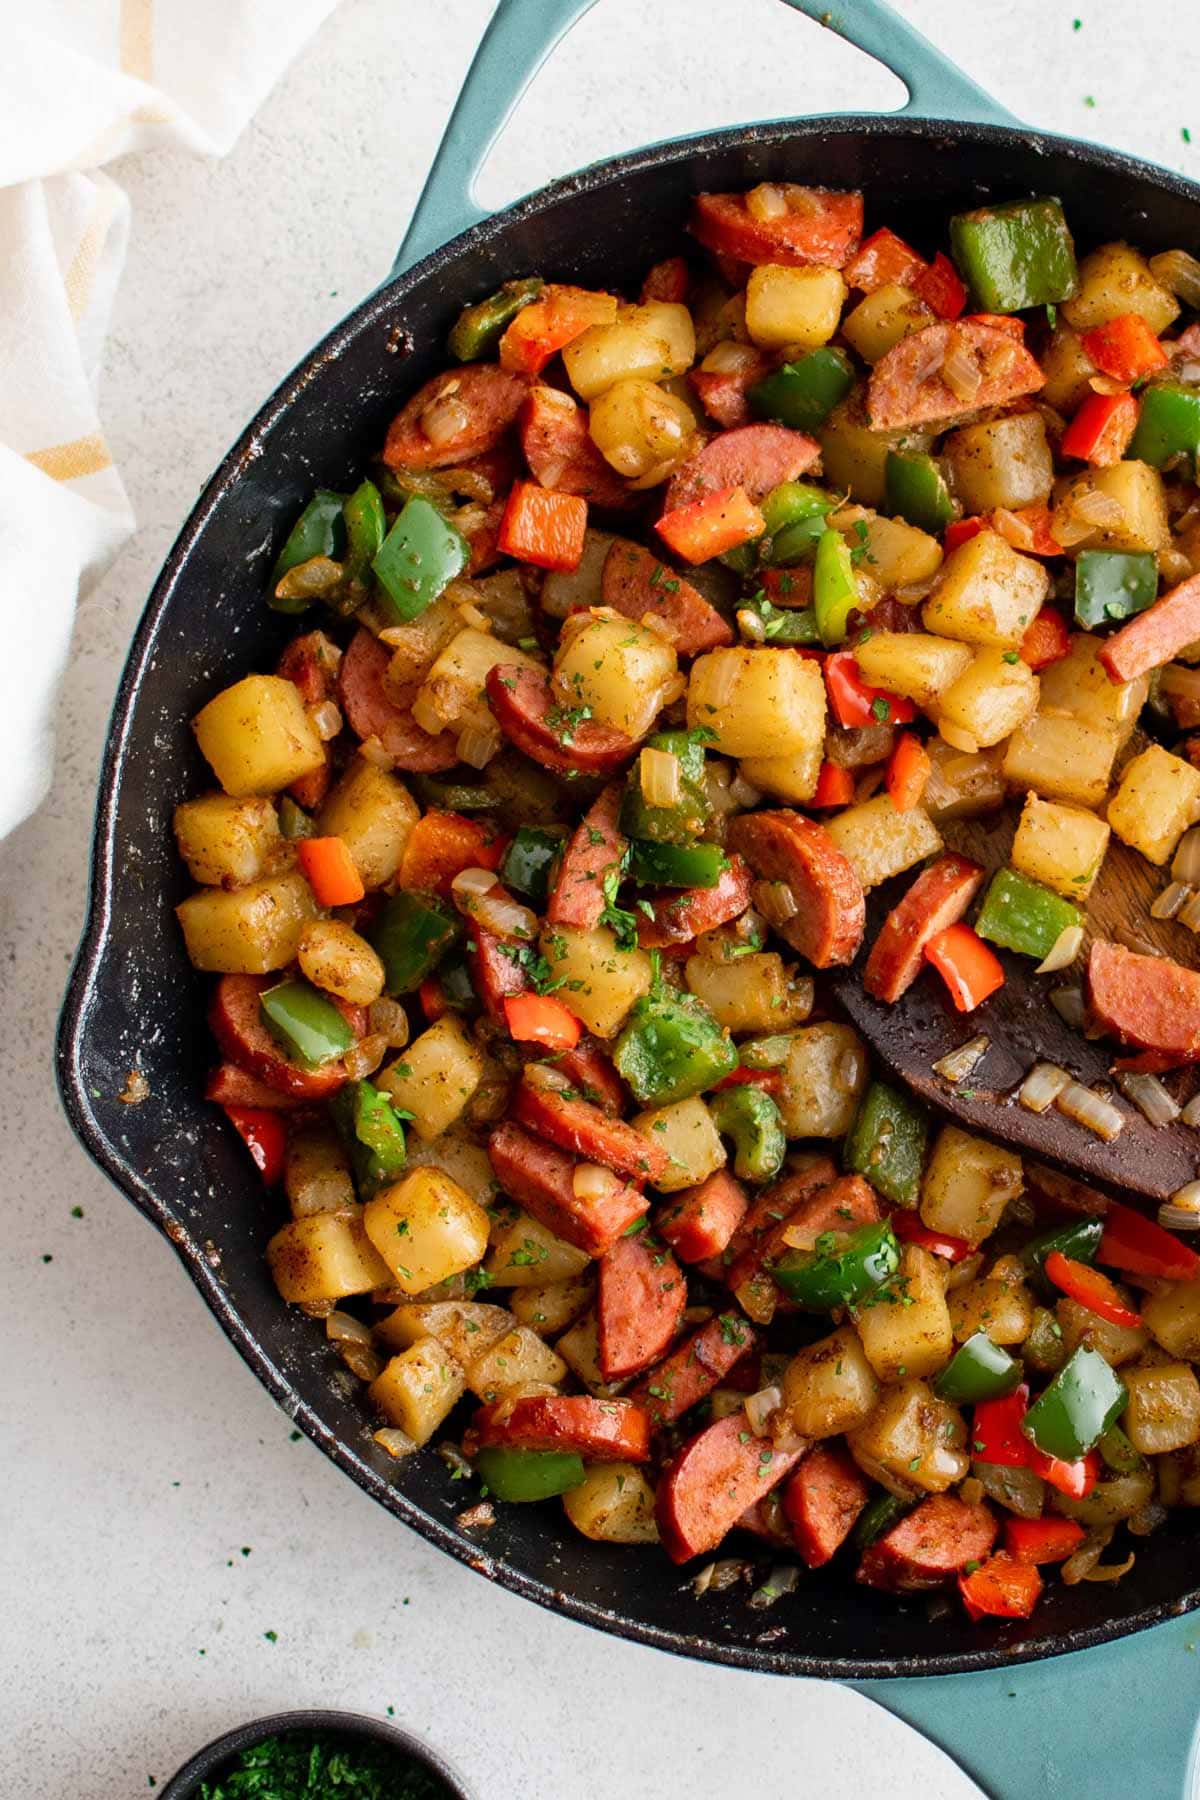 Large skillet filled with smoked sausage, potatoes, bell peppers and onions.